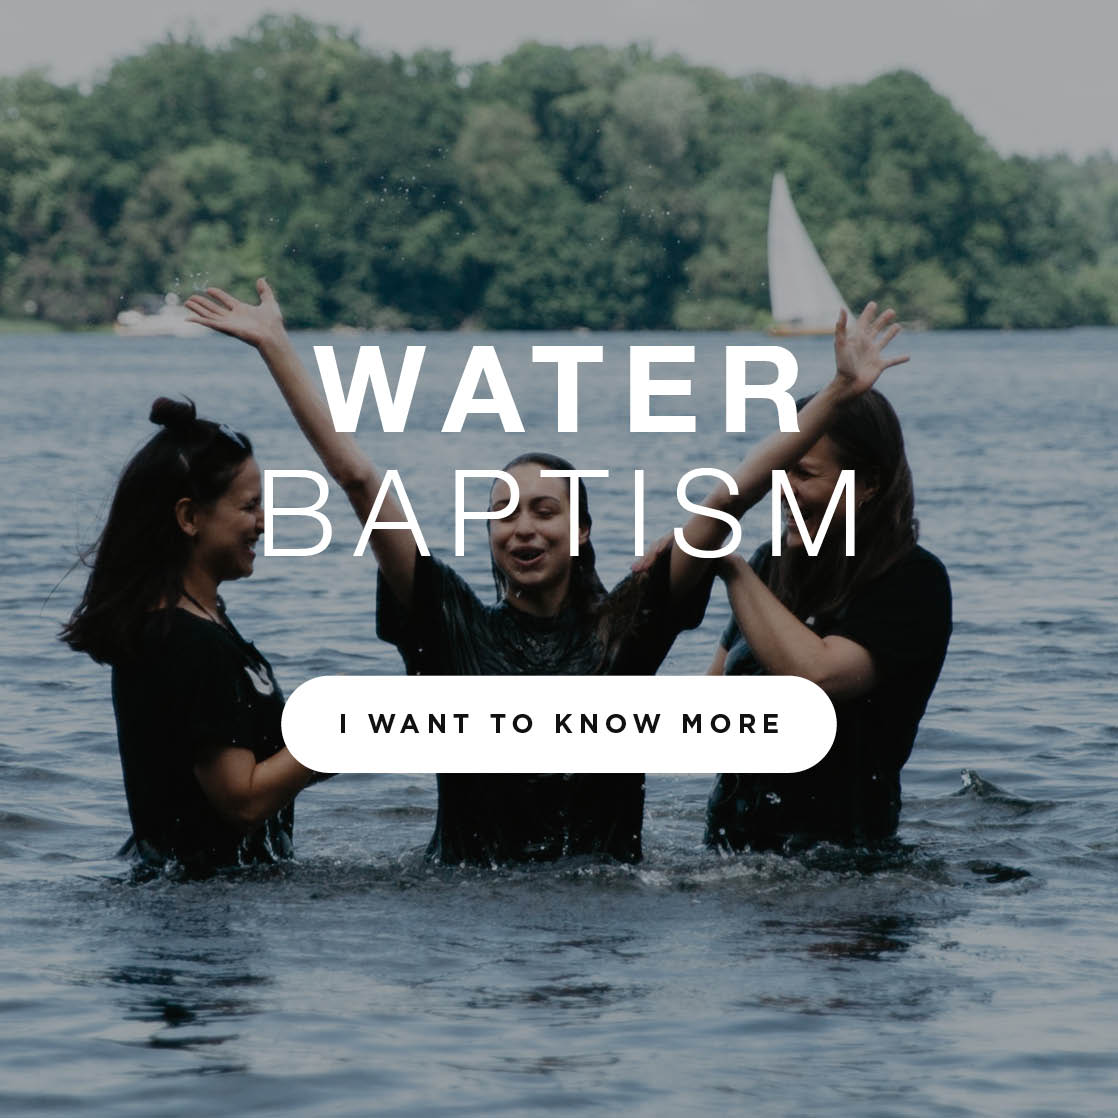 Water Baptism – I want to know more